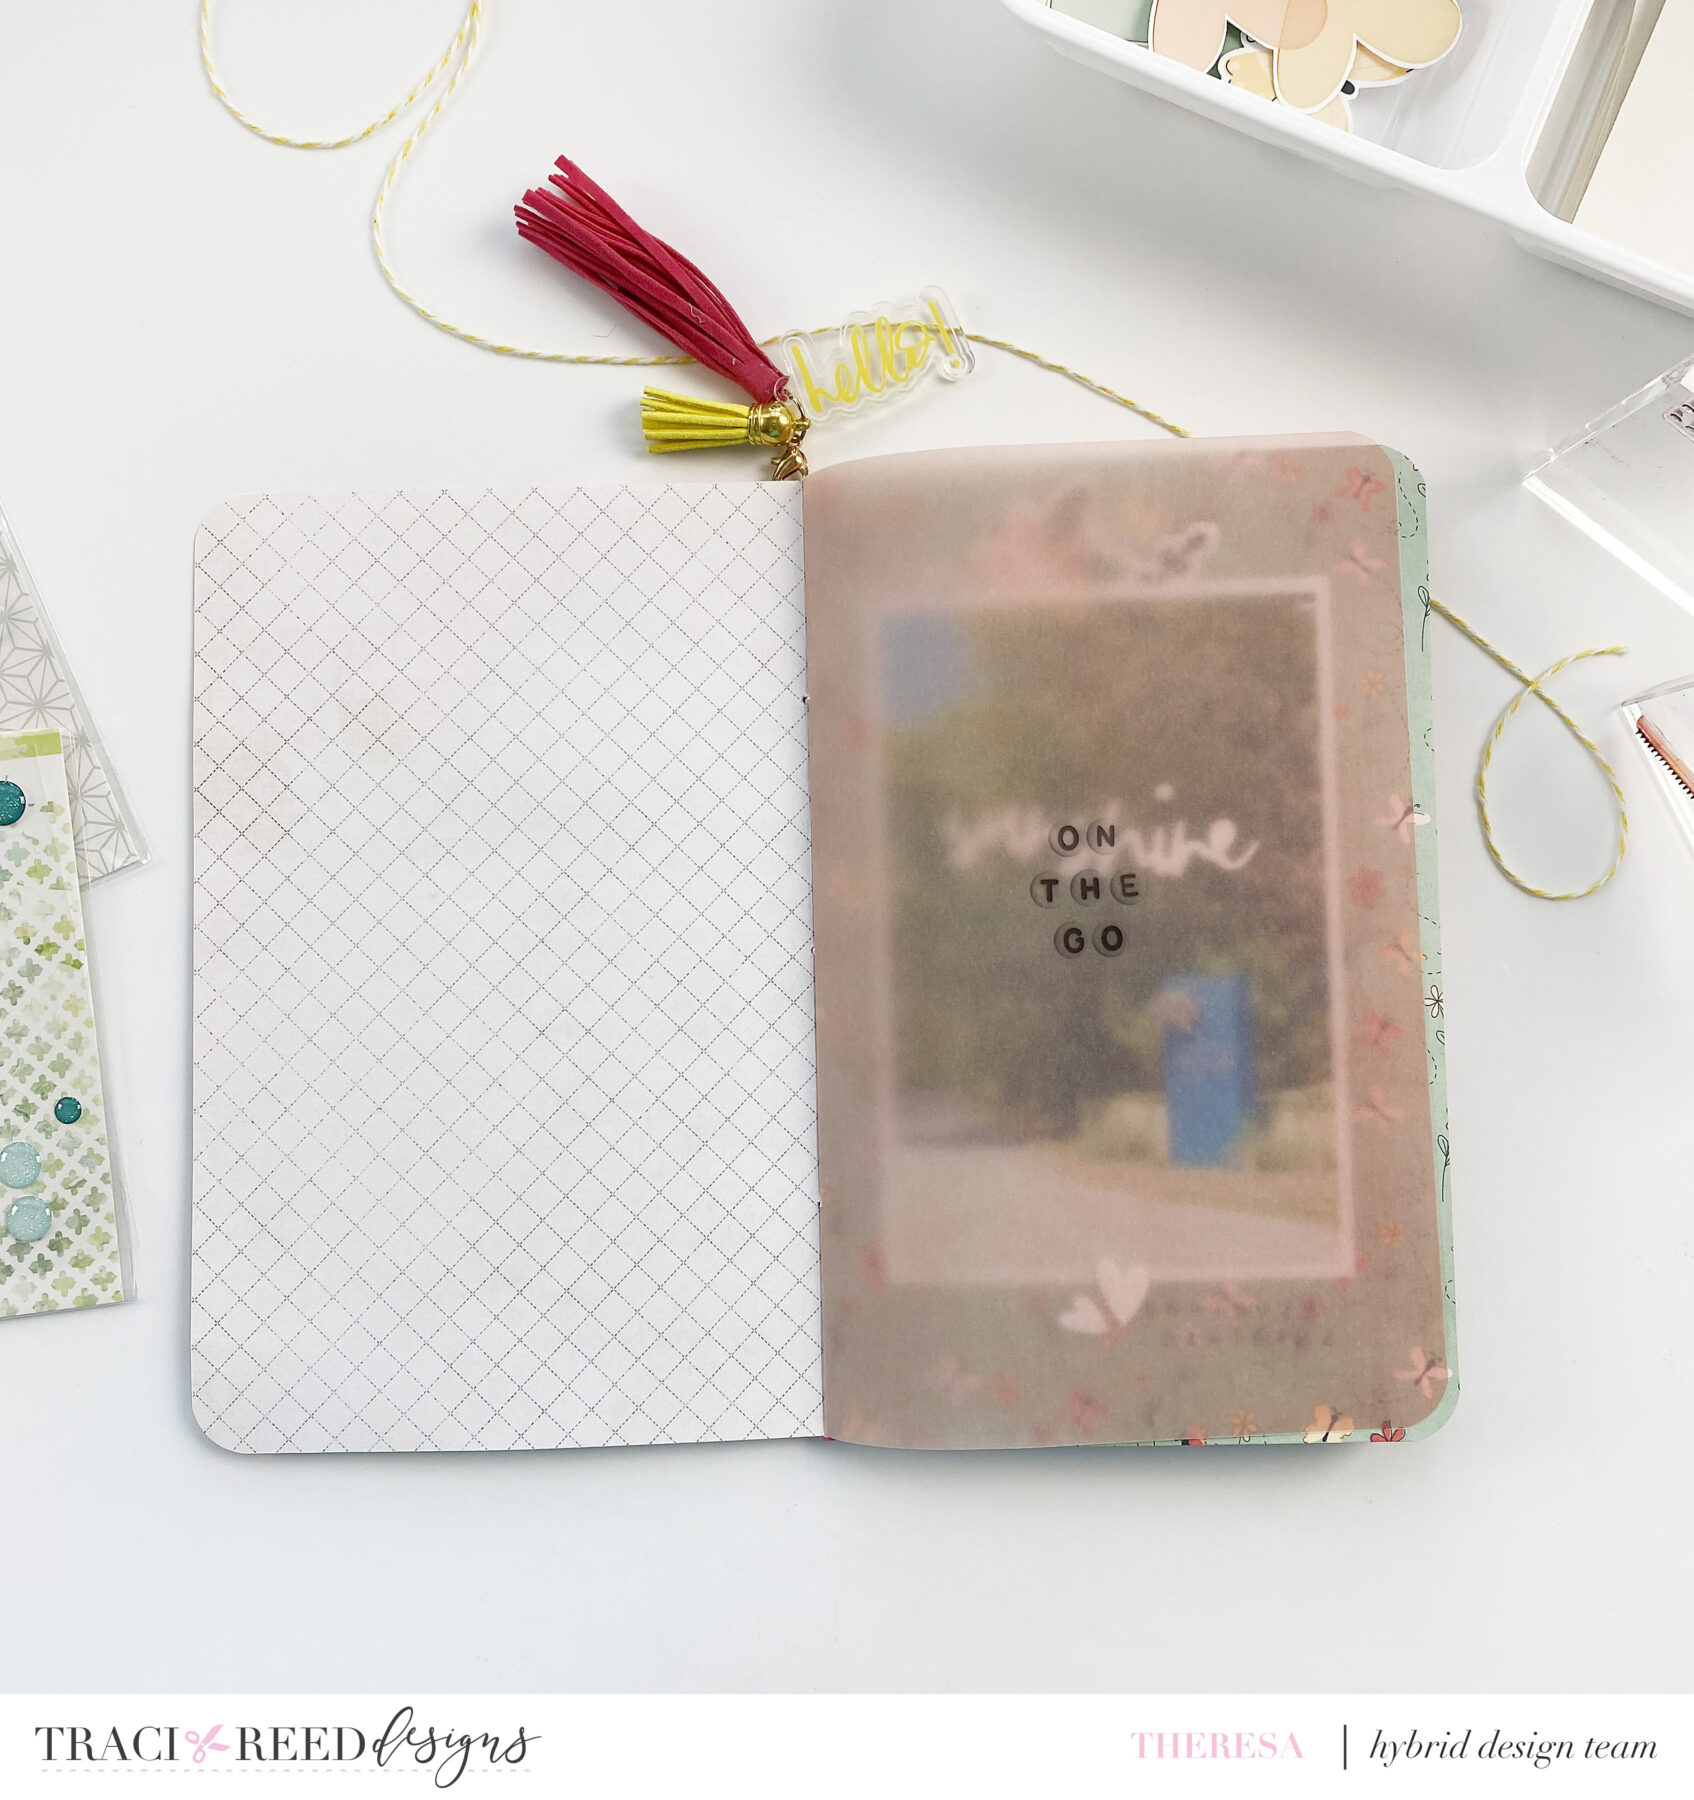 Traci Reed Designs Creative Team | Mini Album Ft On The Go And Going Slow